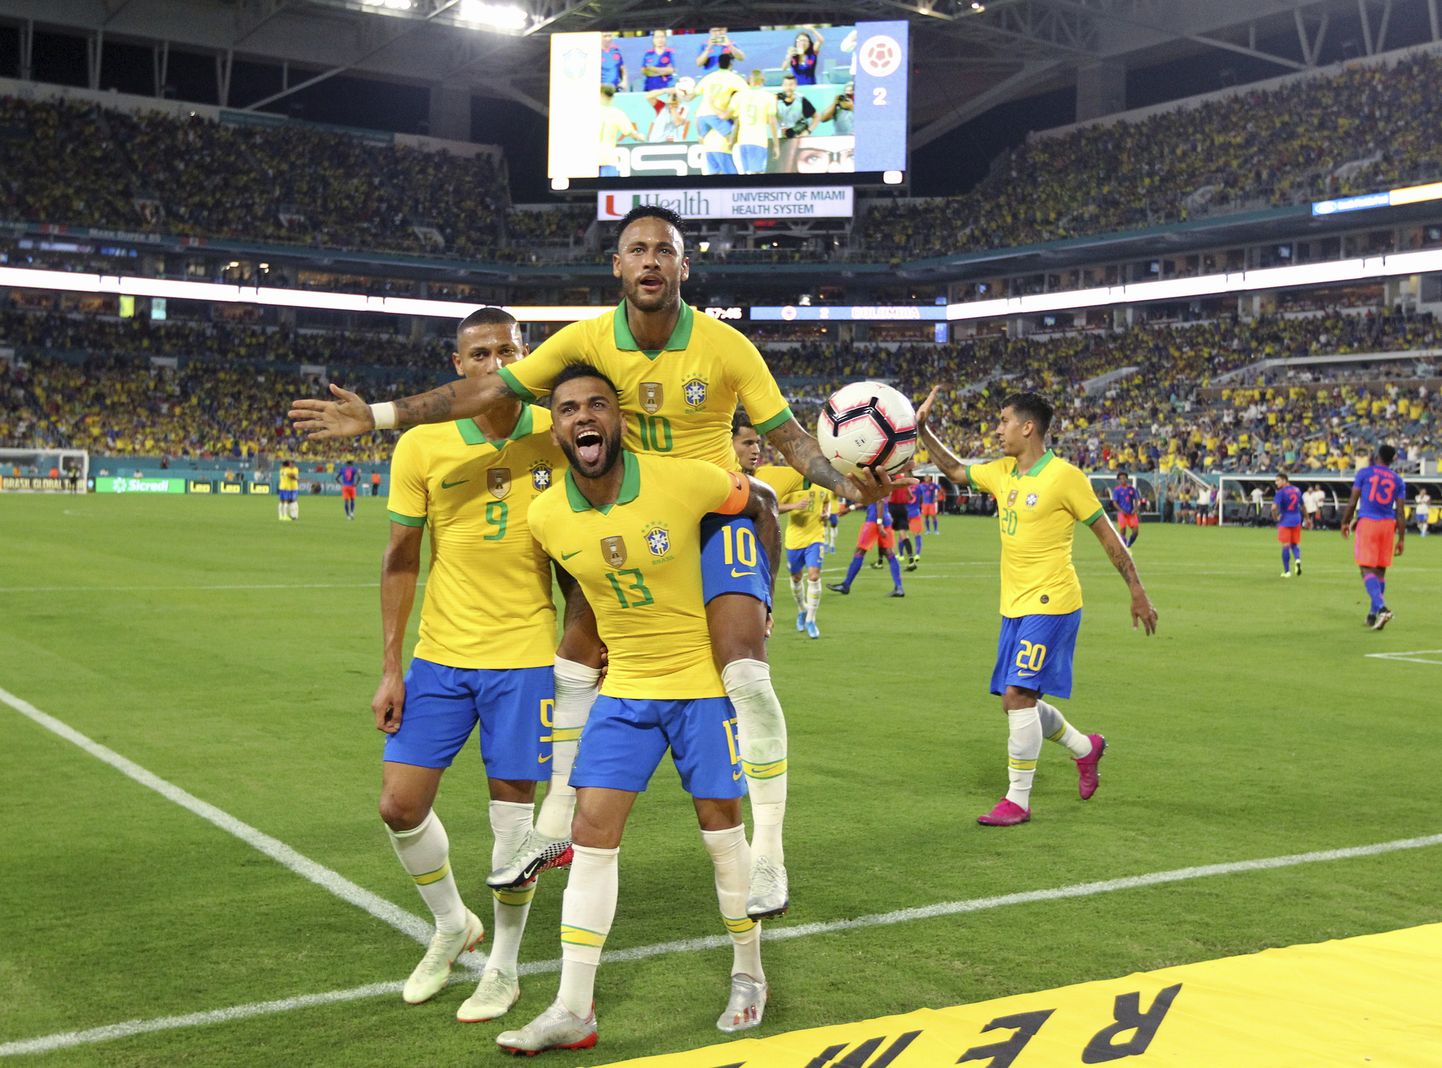 Brazil forward Neymar (10) celebrates with Dani Alves (13) and Richarlison (9) after scoring the second goal of his team during the second half of an international friendly soccer match against Colombia, Friday, Sept. 6, 2019, in Miami Gardens, Fla. (David Santiago/Miami Herald via AP)